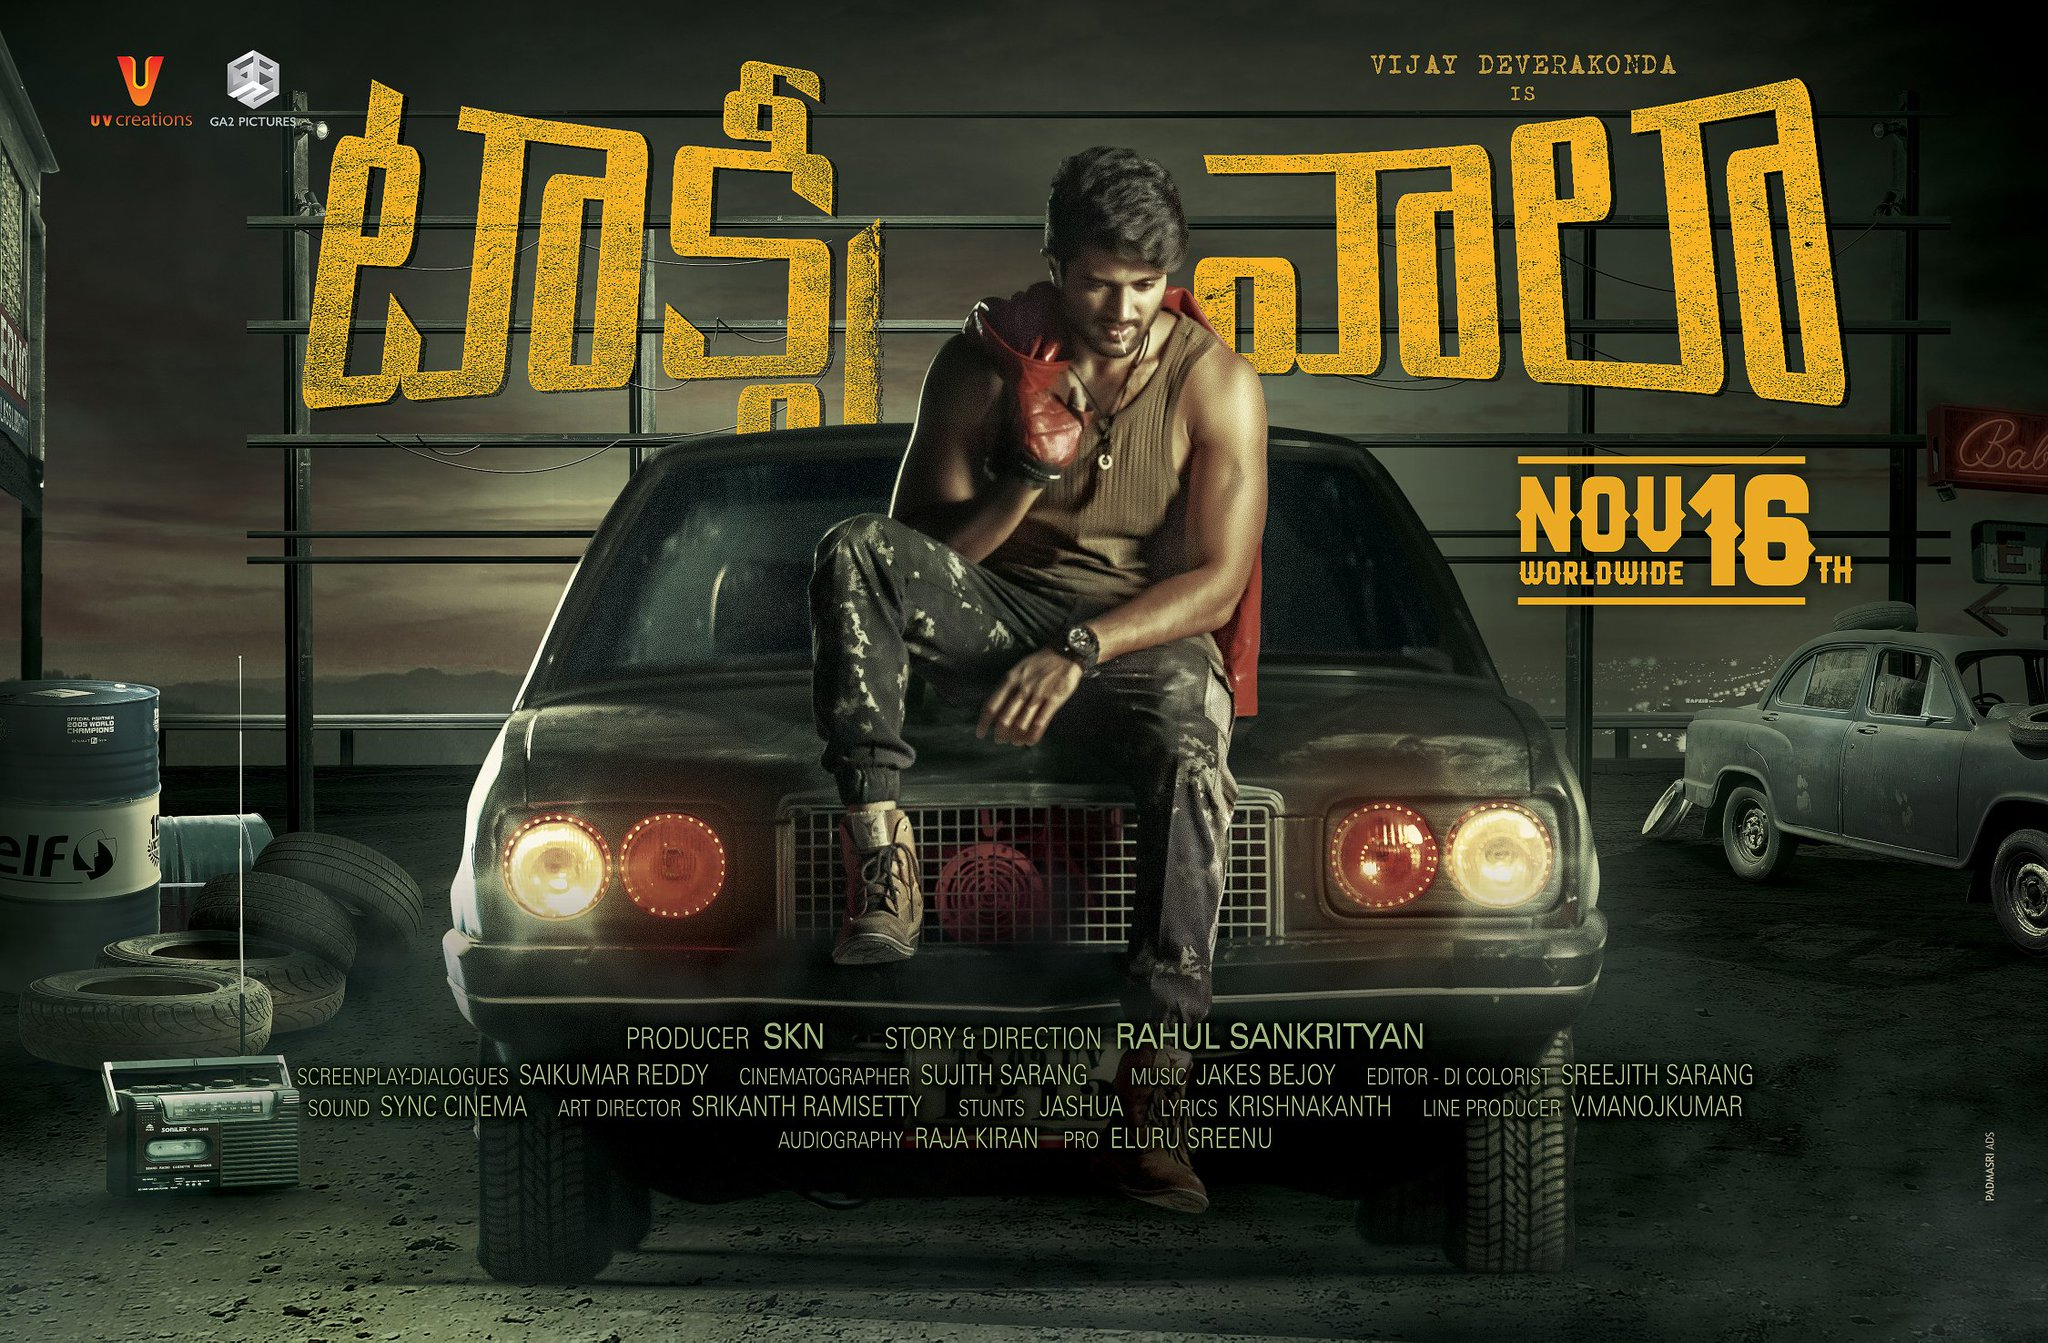 Rowdy is back with Taxiwaala on 16th November